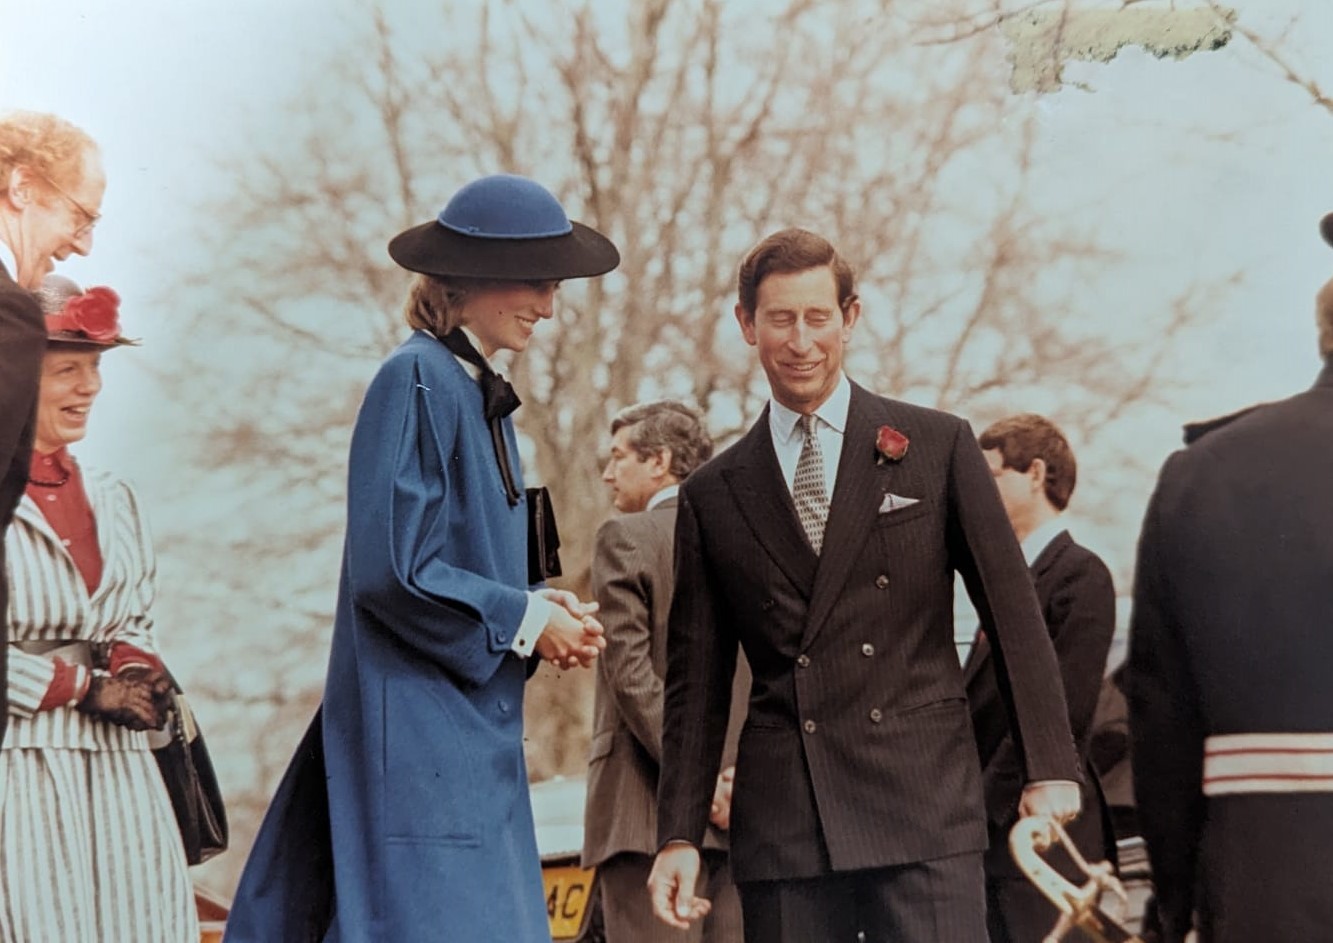 The then Prince Charles and Princess Diana in Hereford, 1985